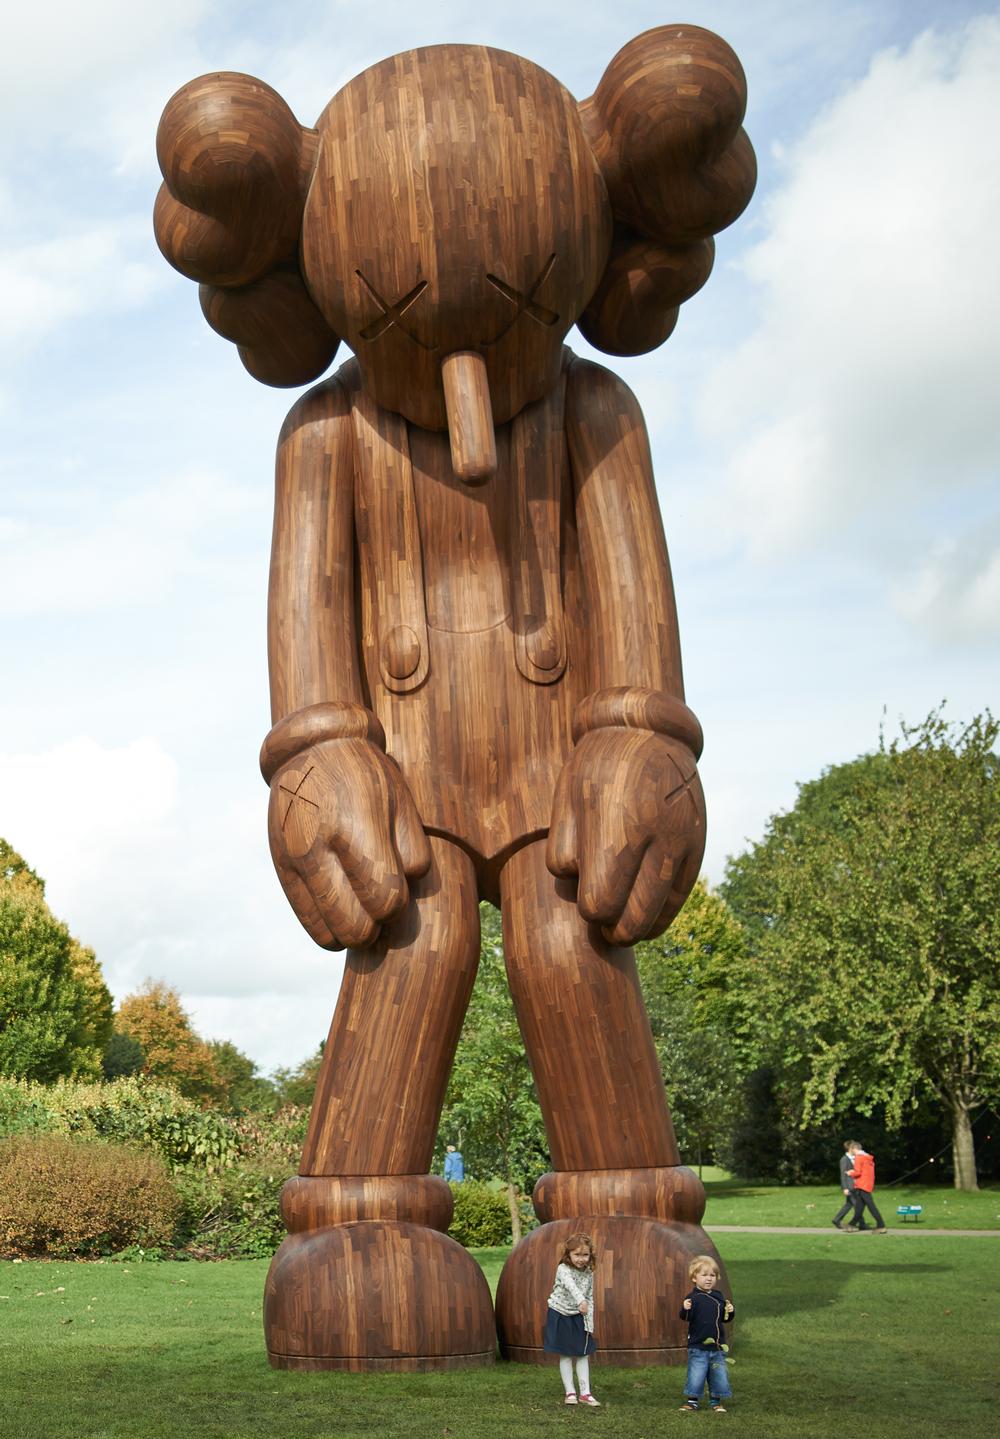 The wood sculpture SMALL LIE, 2013, is the largest in the exhibition, measuring 10 metres in height / JONTY WILDE / COURTESY THE ARTIST AND YSP